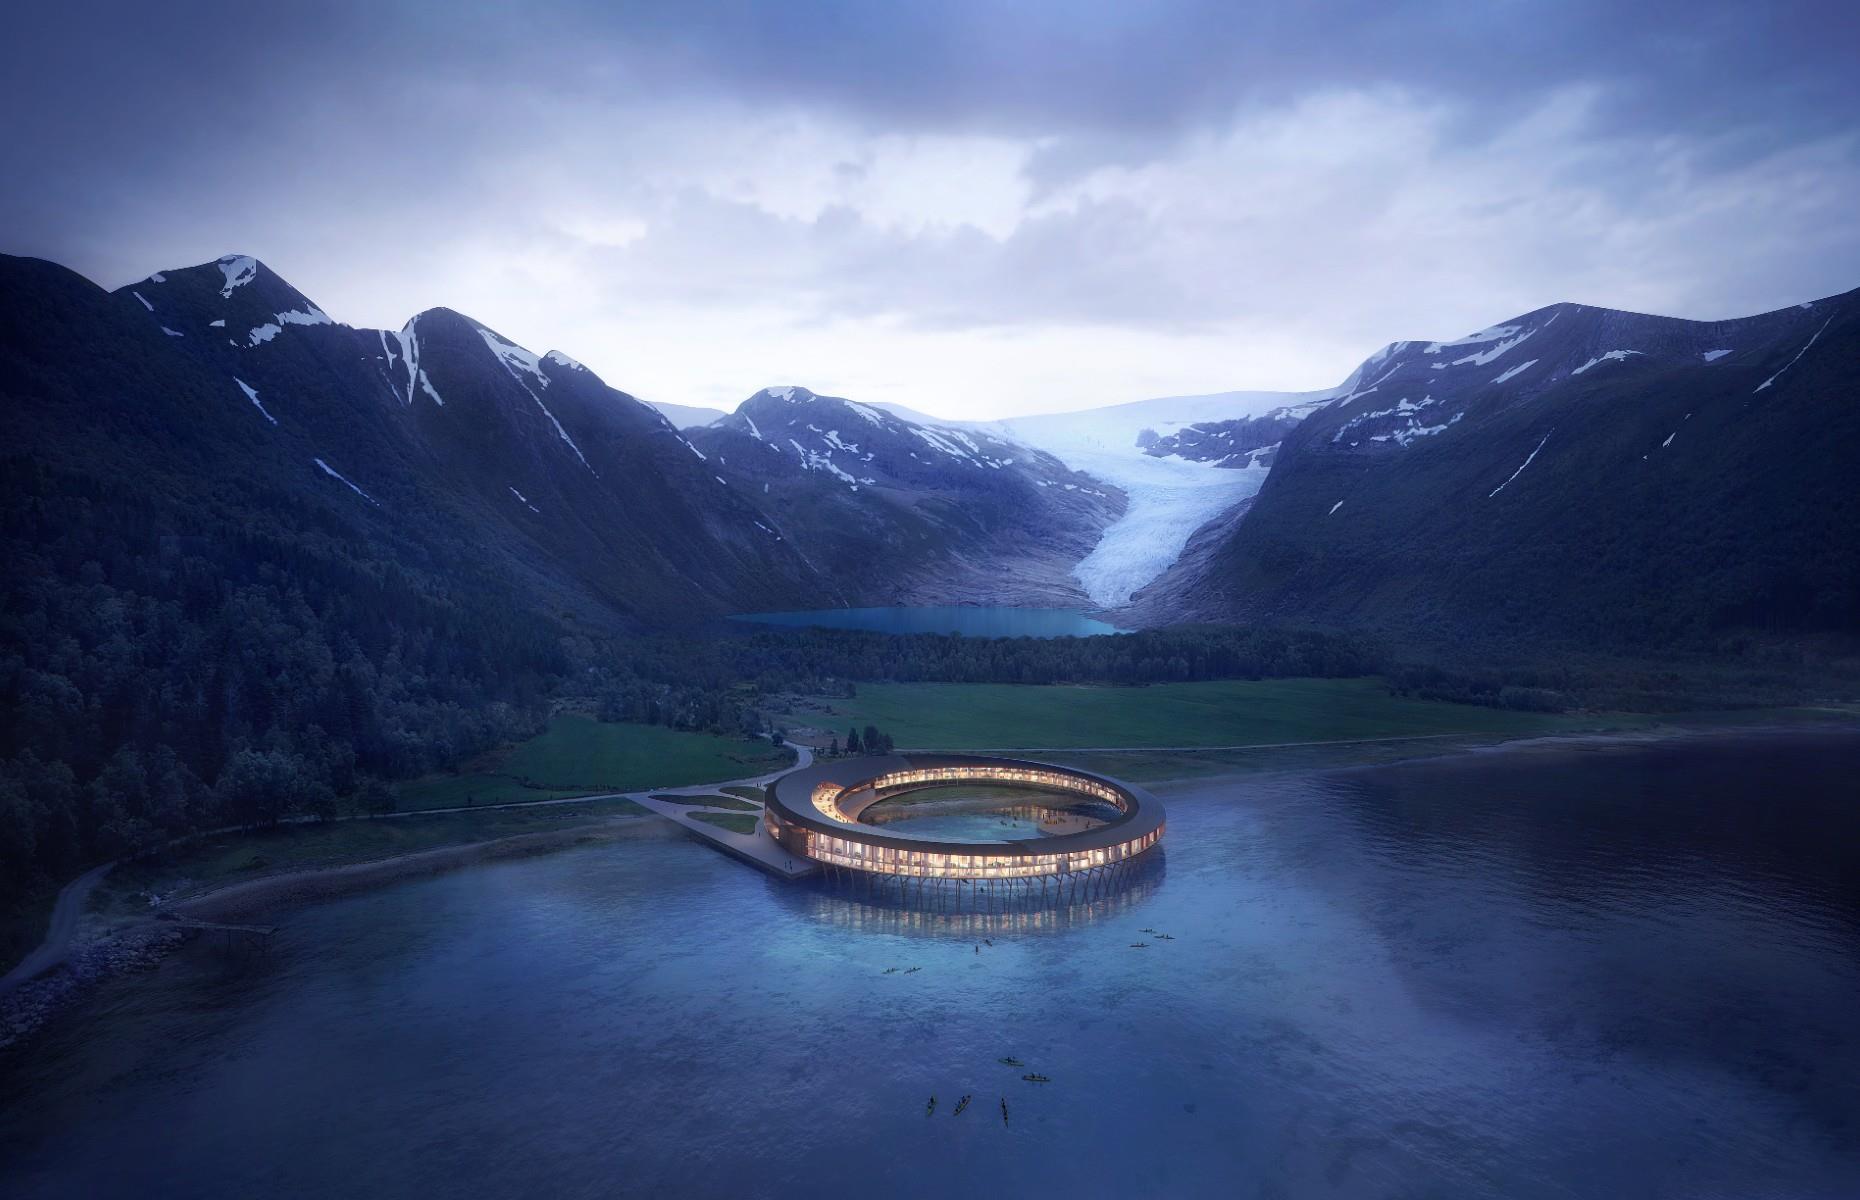 The hotel's design is inspired by a “fiskehjell”, a wooden structure used to dry out fish, as well as traditional fishermen's homes. And it looks especially striking against its mountain backdrop. Beyond ogling the hotel and surrounding landscapes, guests can relax at the two-storey spa or get involved with activities, from sailing on the fjords in summer to cross-country skiing in winter.